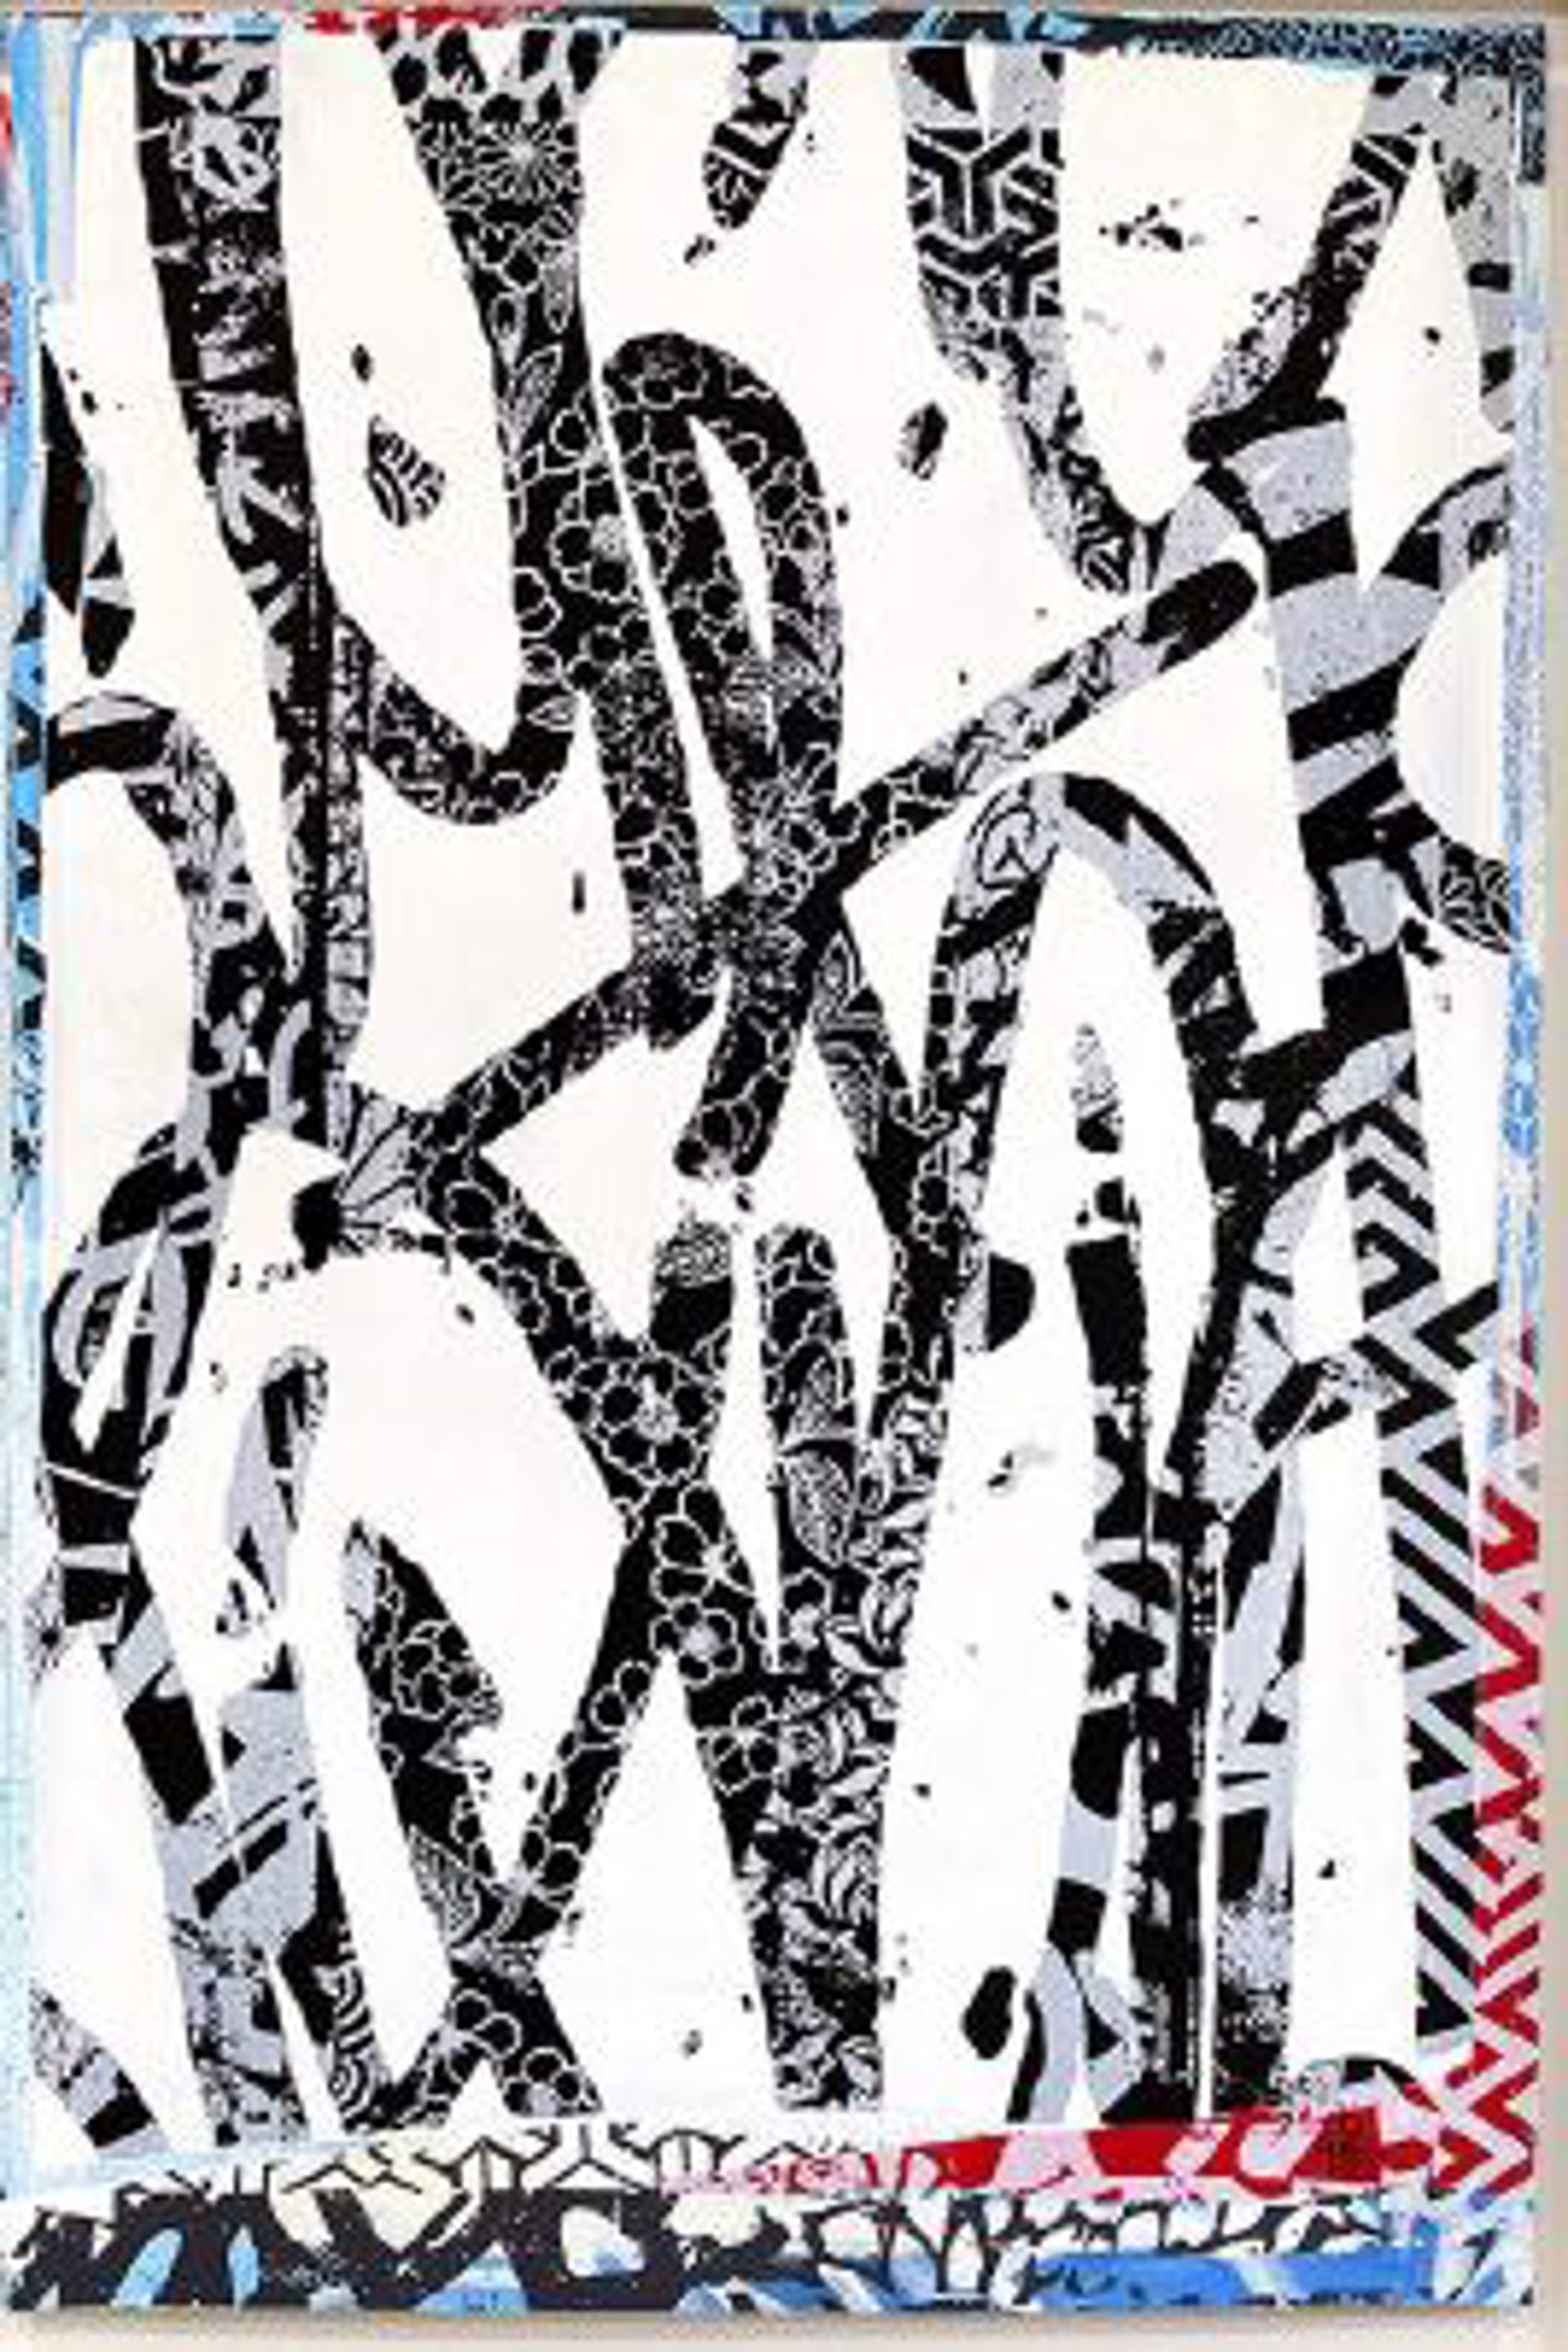 'BACK Painting' #040806 (ABSTRACT) by Hush